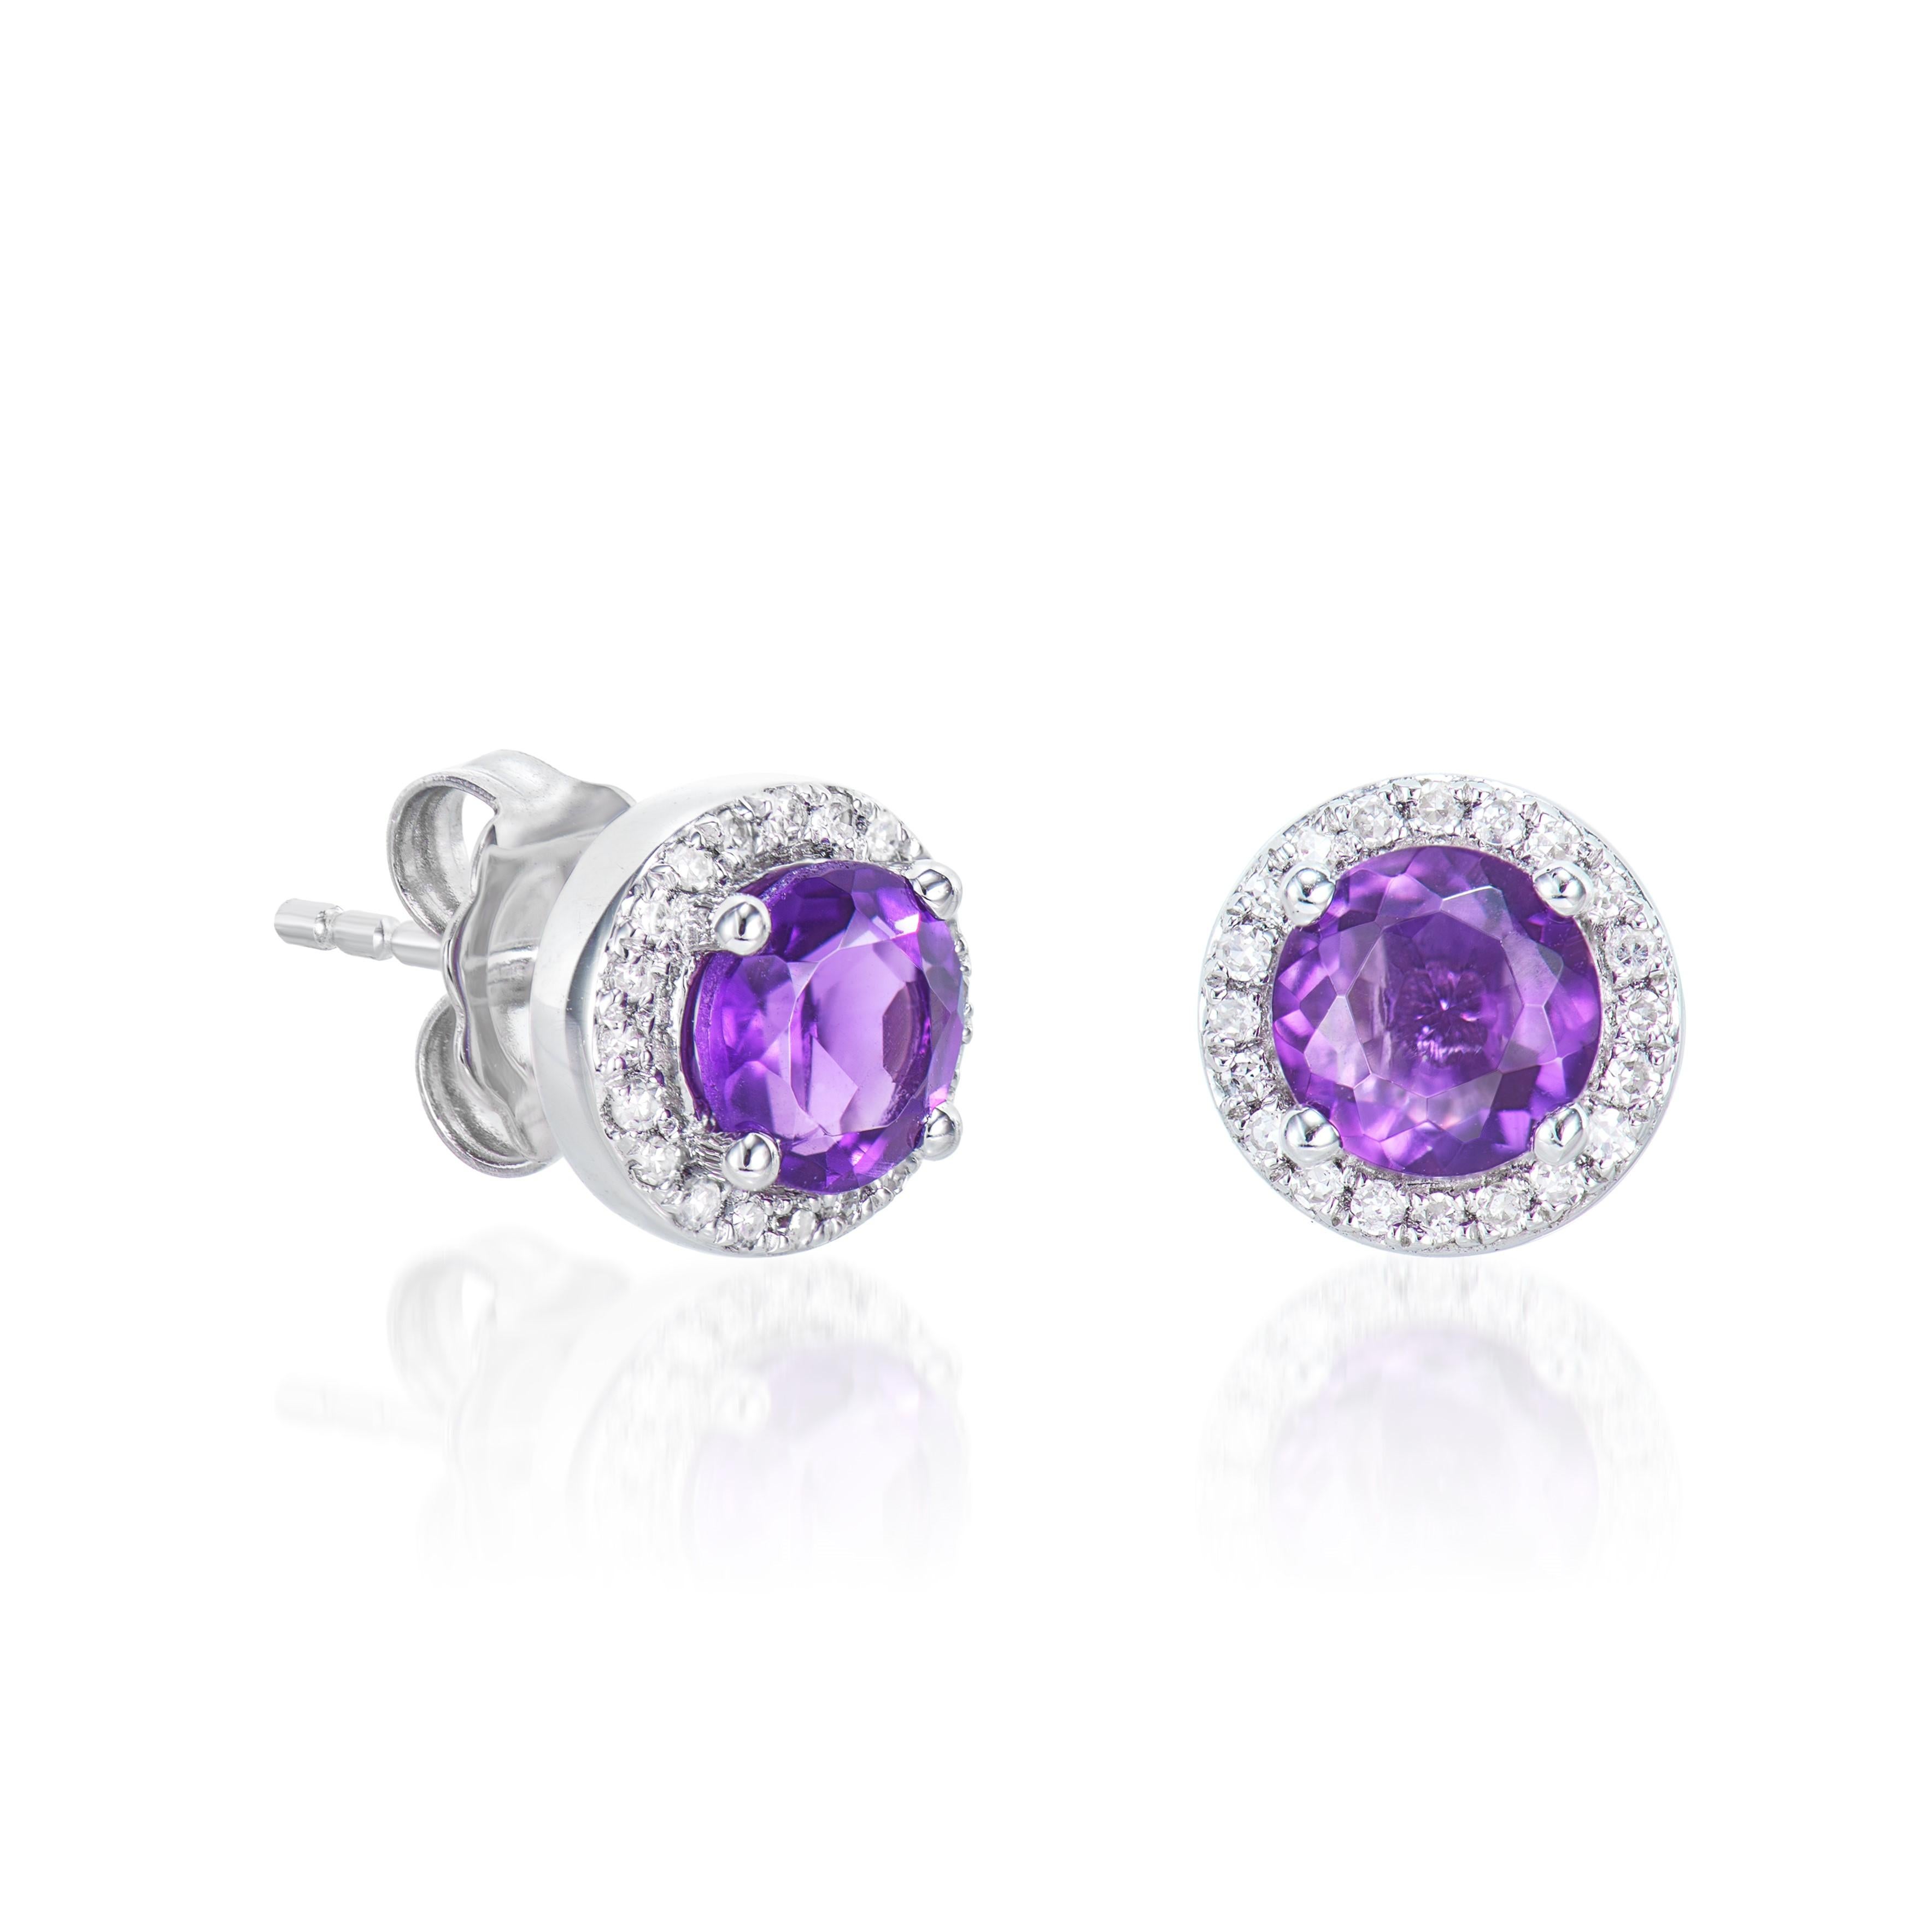 Presented A lovely set of Amethyst for people who value quality and want to wear it to any occasion or celebration. The White gold Amethyst Stud Earrings adorned with diamonds offer a classic yet elegant appearance.

Amethyst Stud Earring in 18Karat